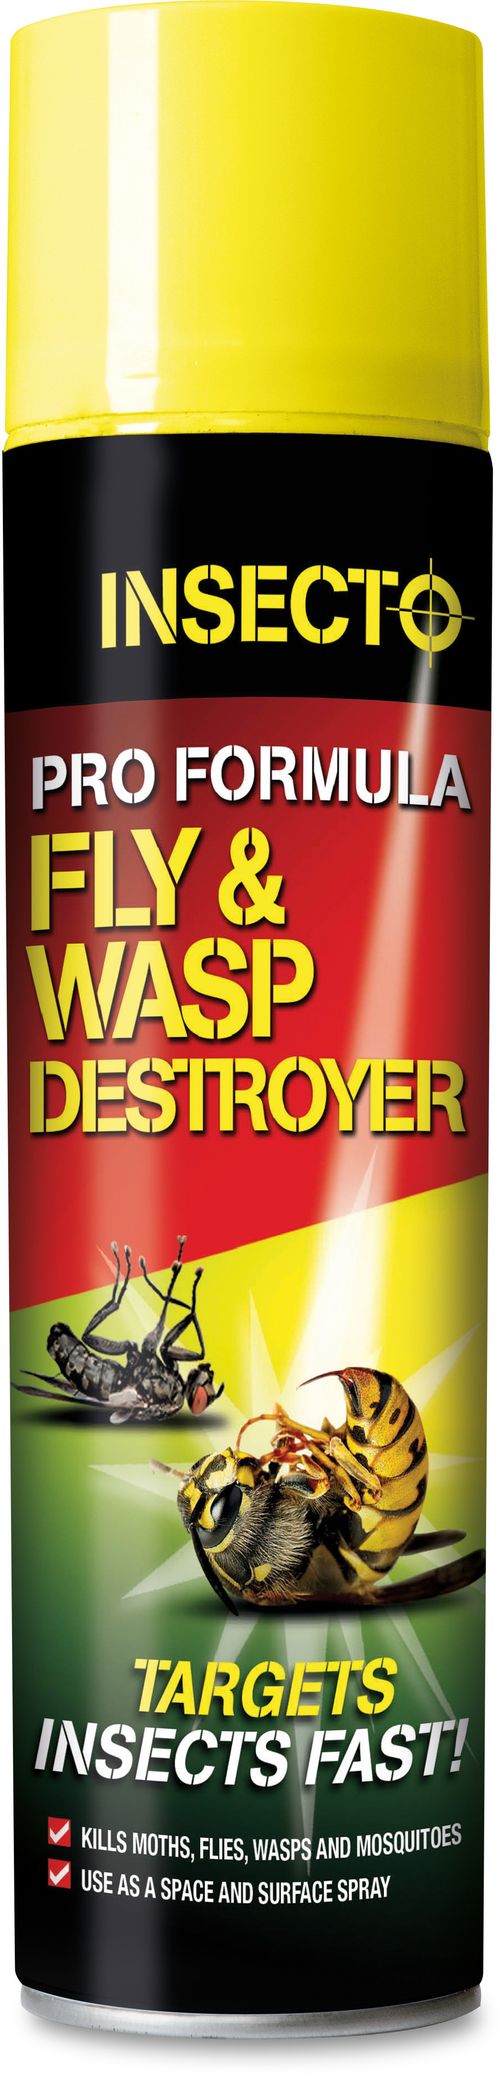 Insecto Pro Formula Fly & Wasp Destroyer